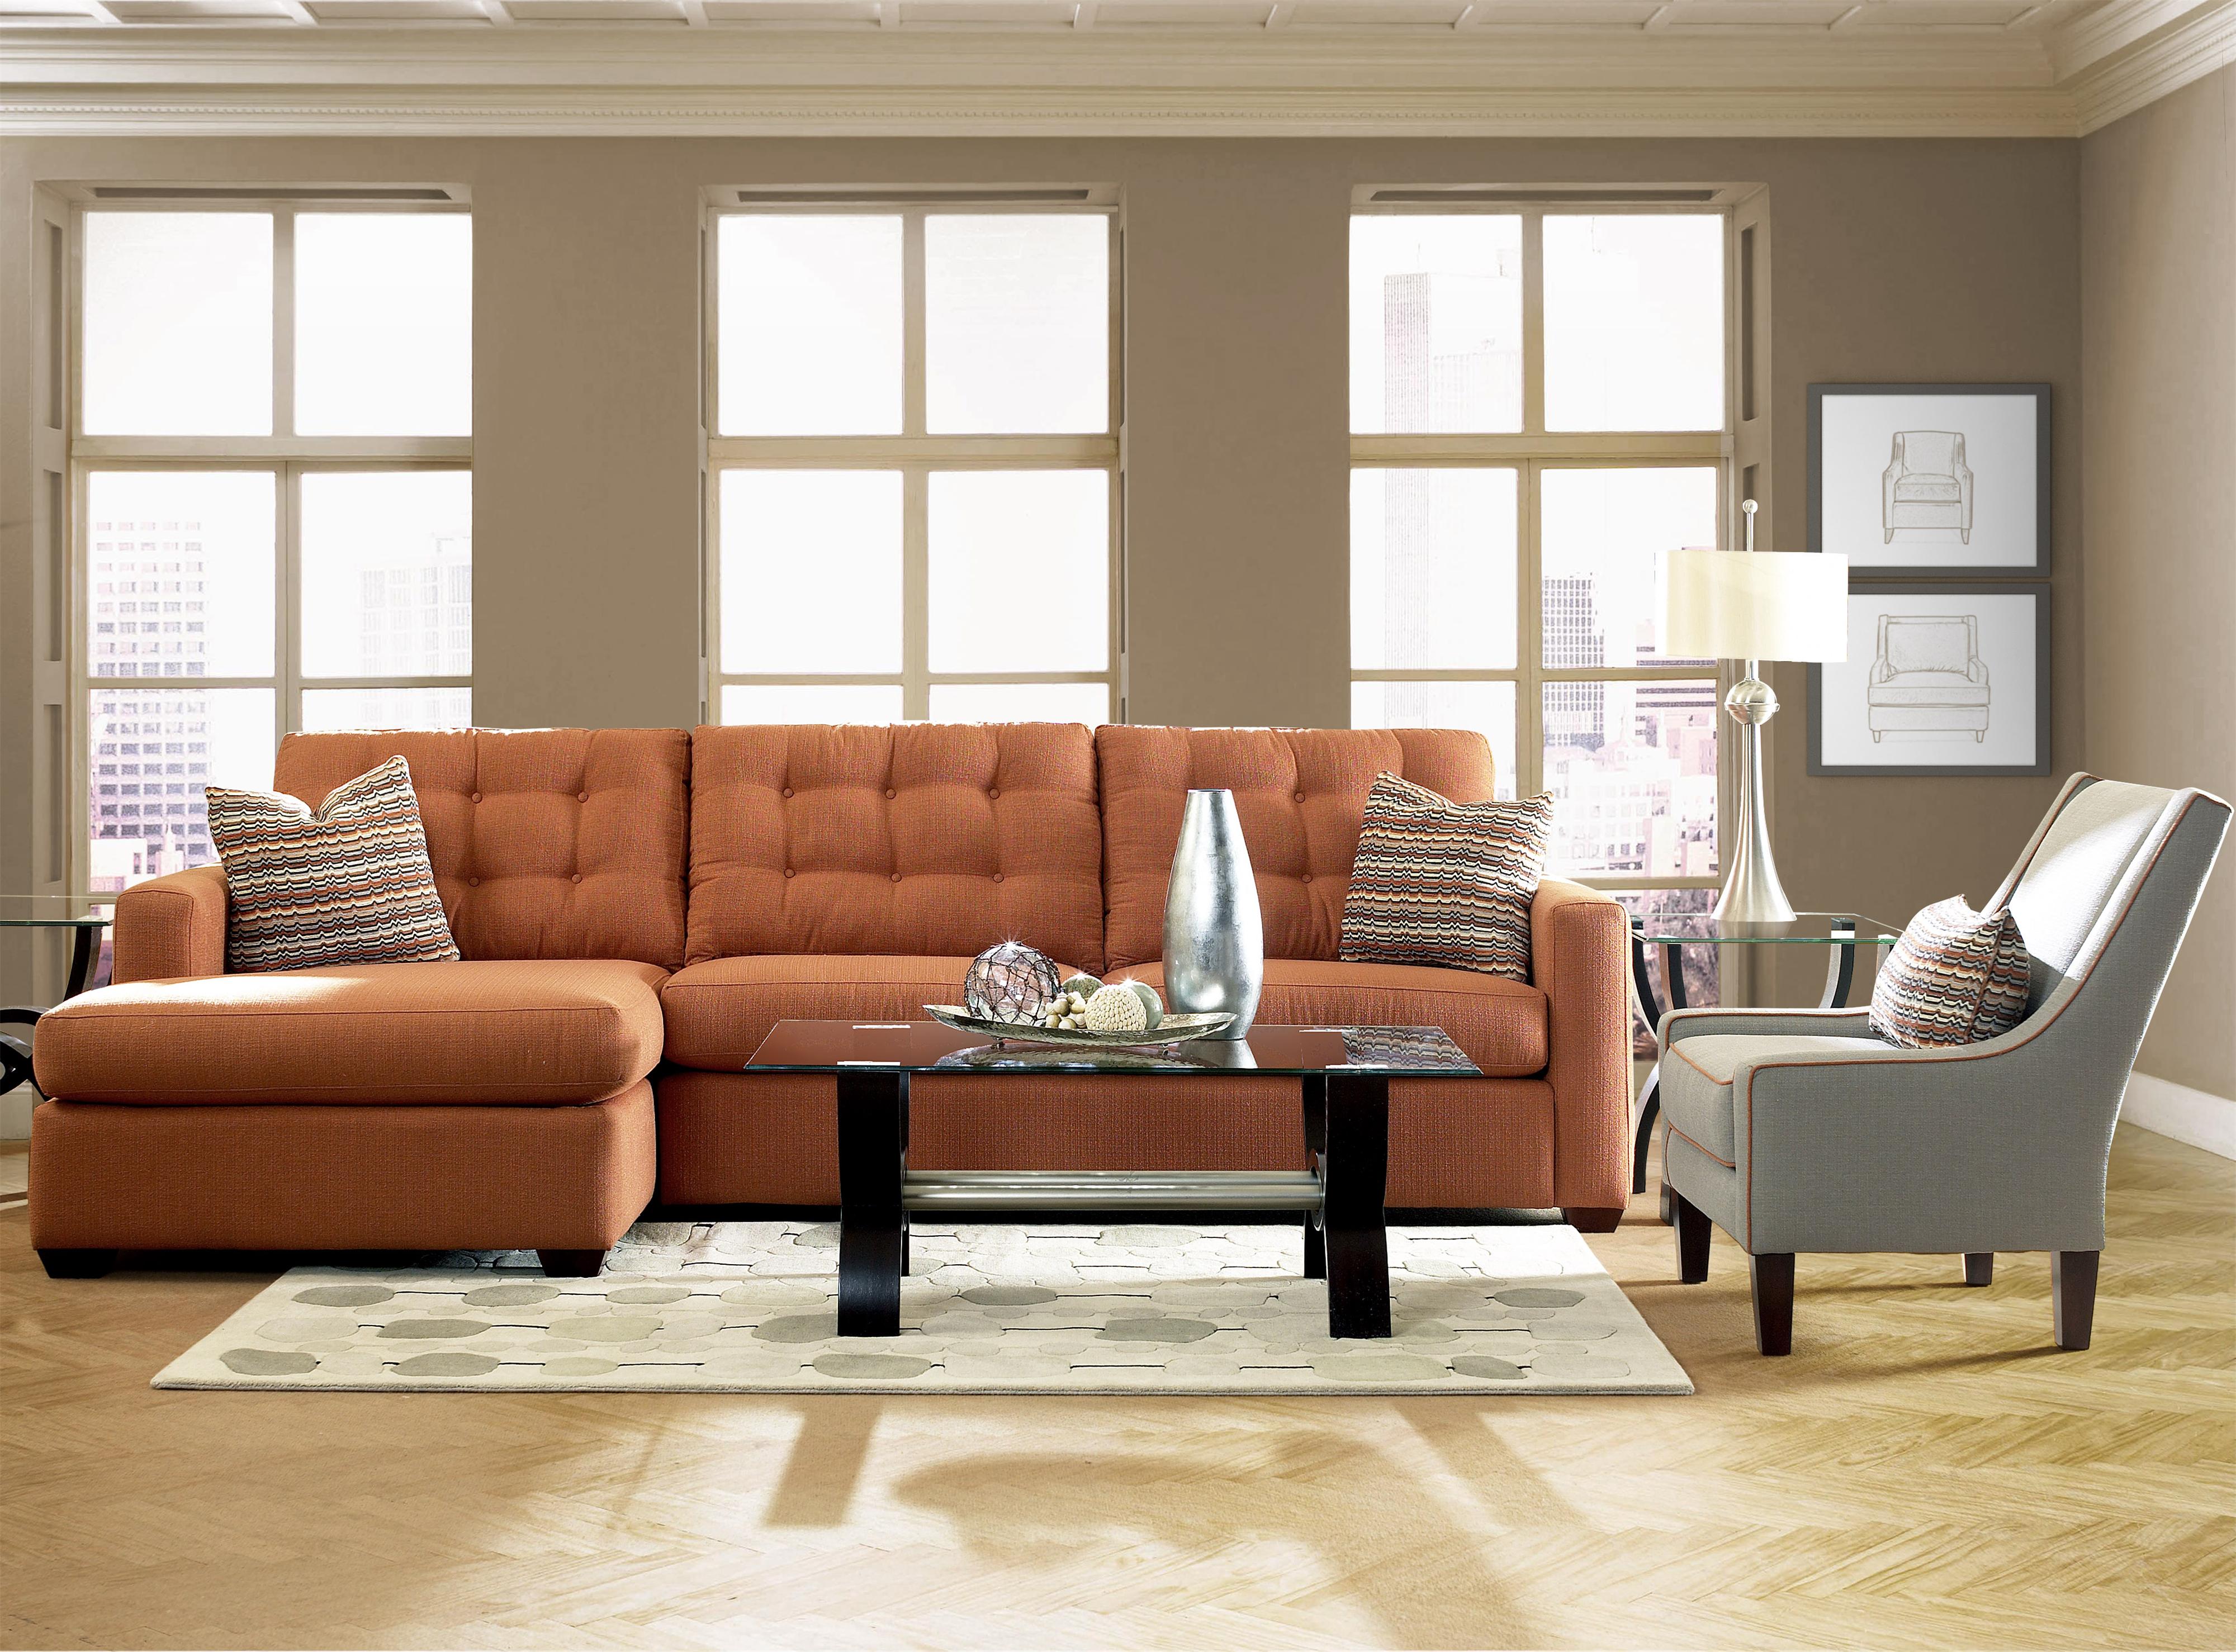 living room orange tufted lounge with grey faux leather sofa chair white pattern rug target black metal leg glass top table wooden laminate flooring idea silver end lamp rainbow